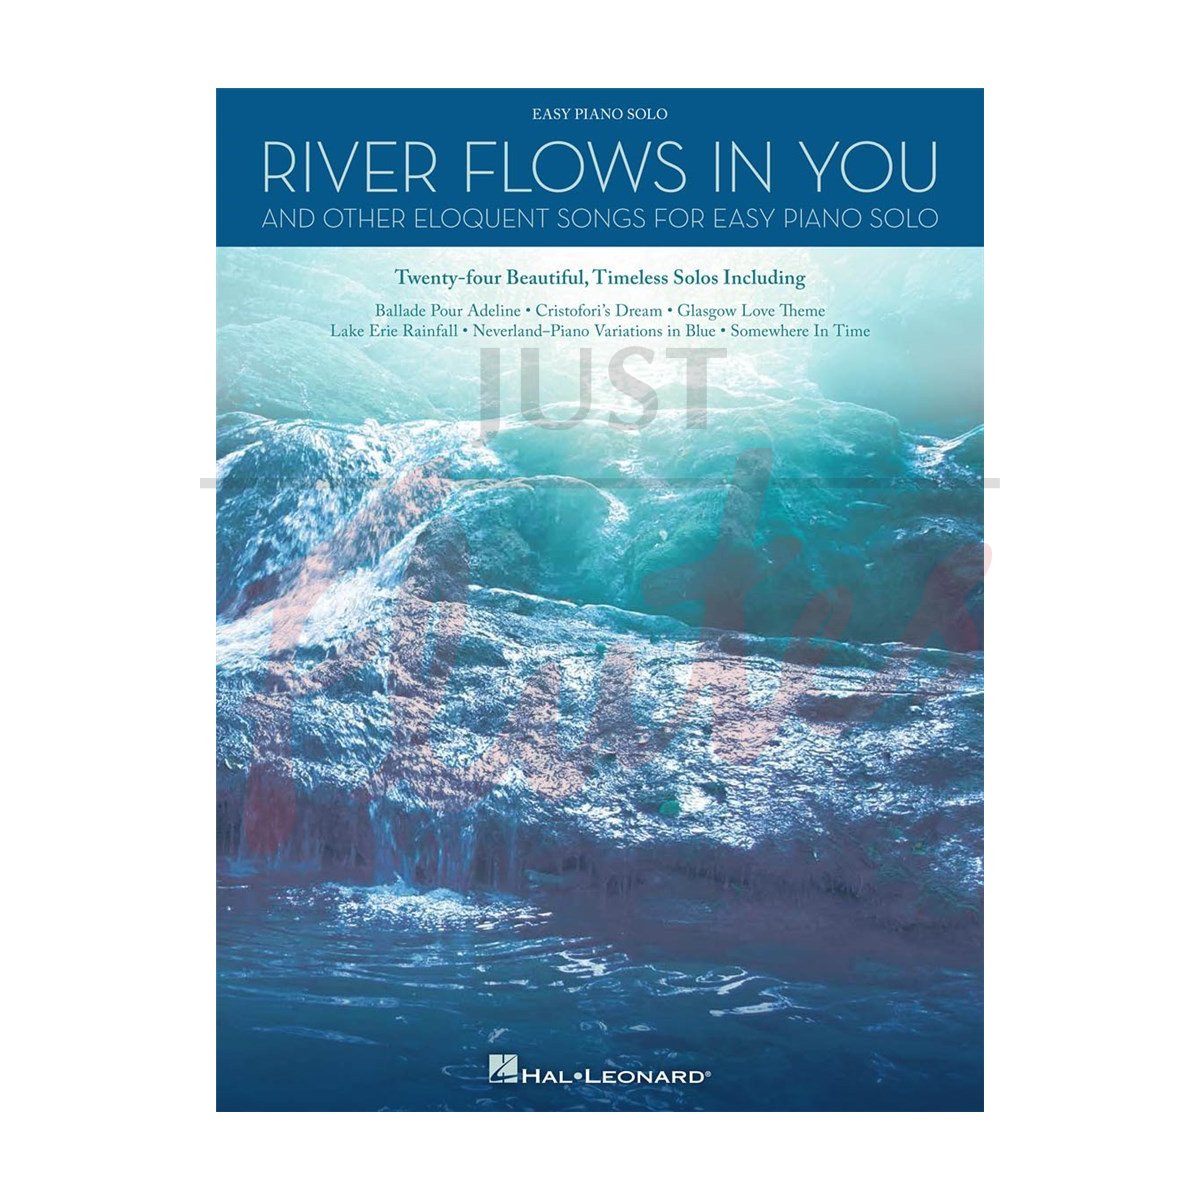 River Flows in You and Other Eloquent Songs for Easy Piano Solo